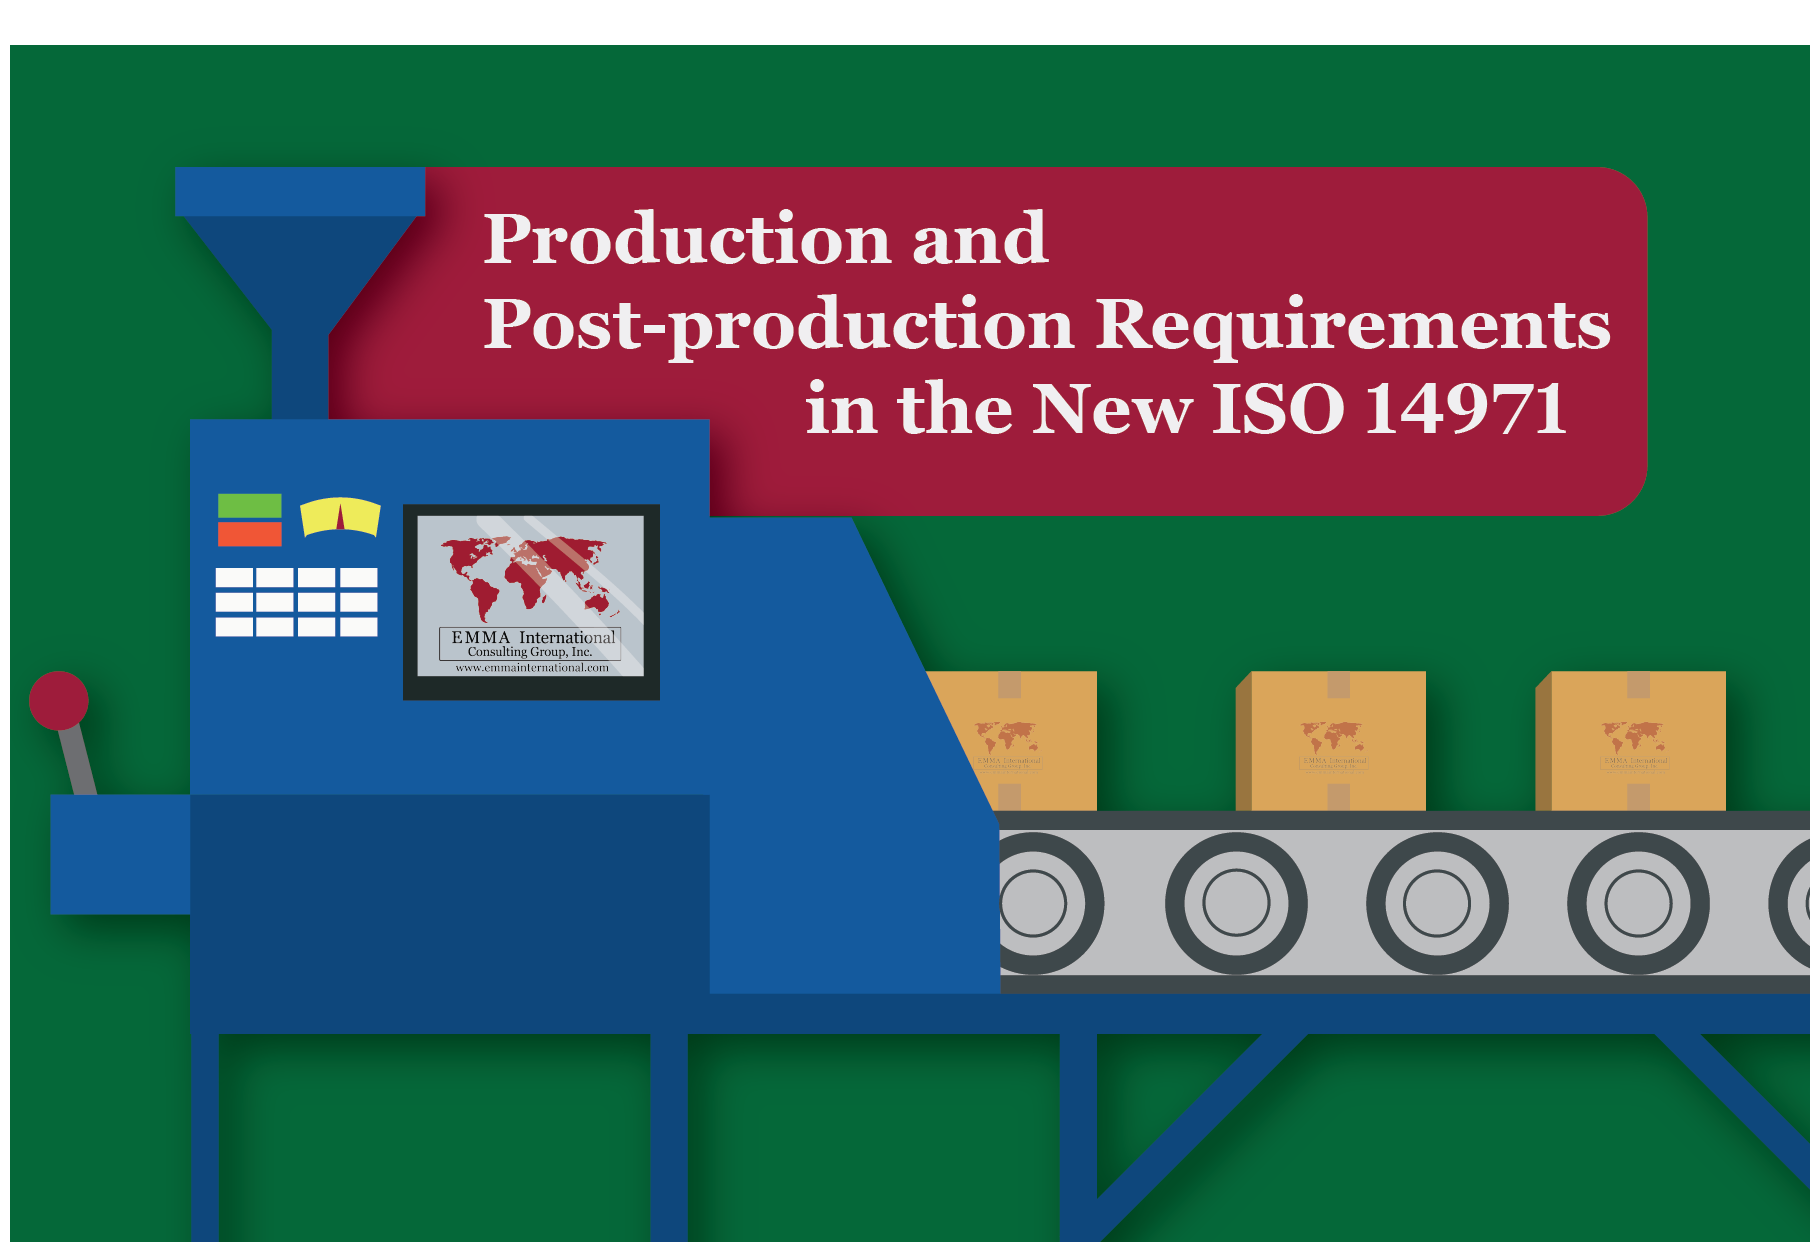 Production and Post-production Requirements in the New ISO 14971